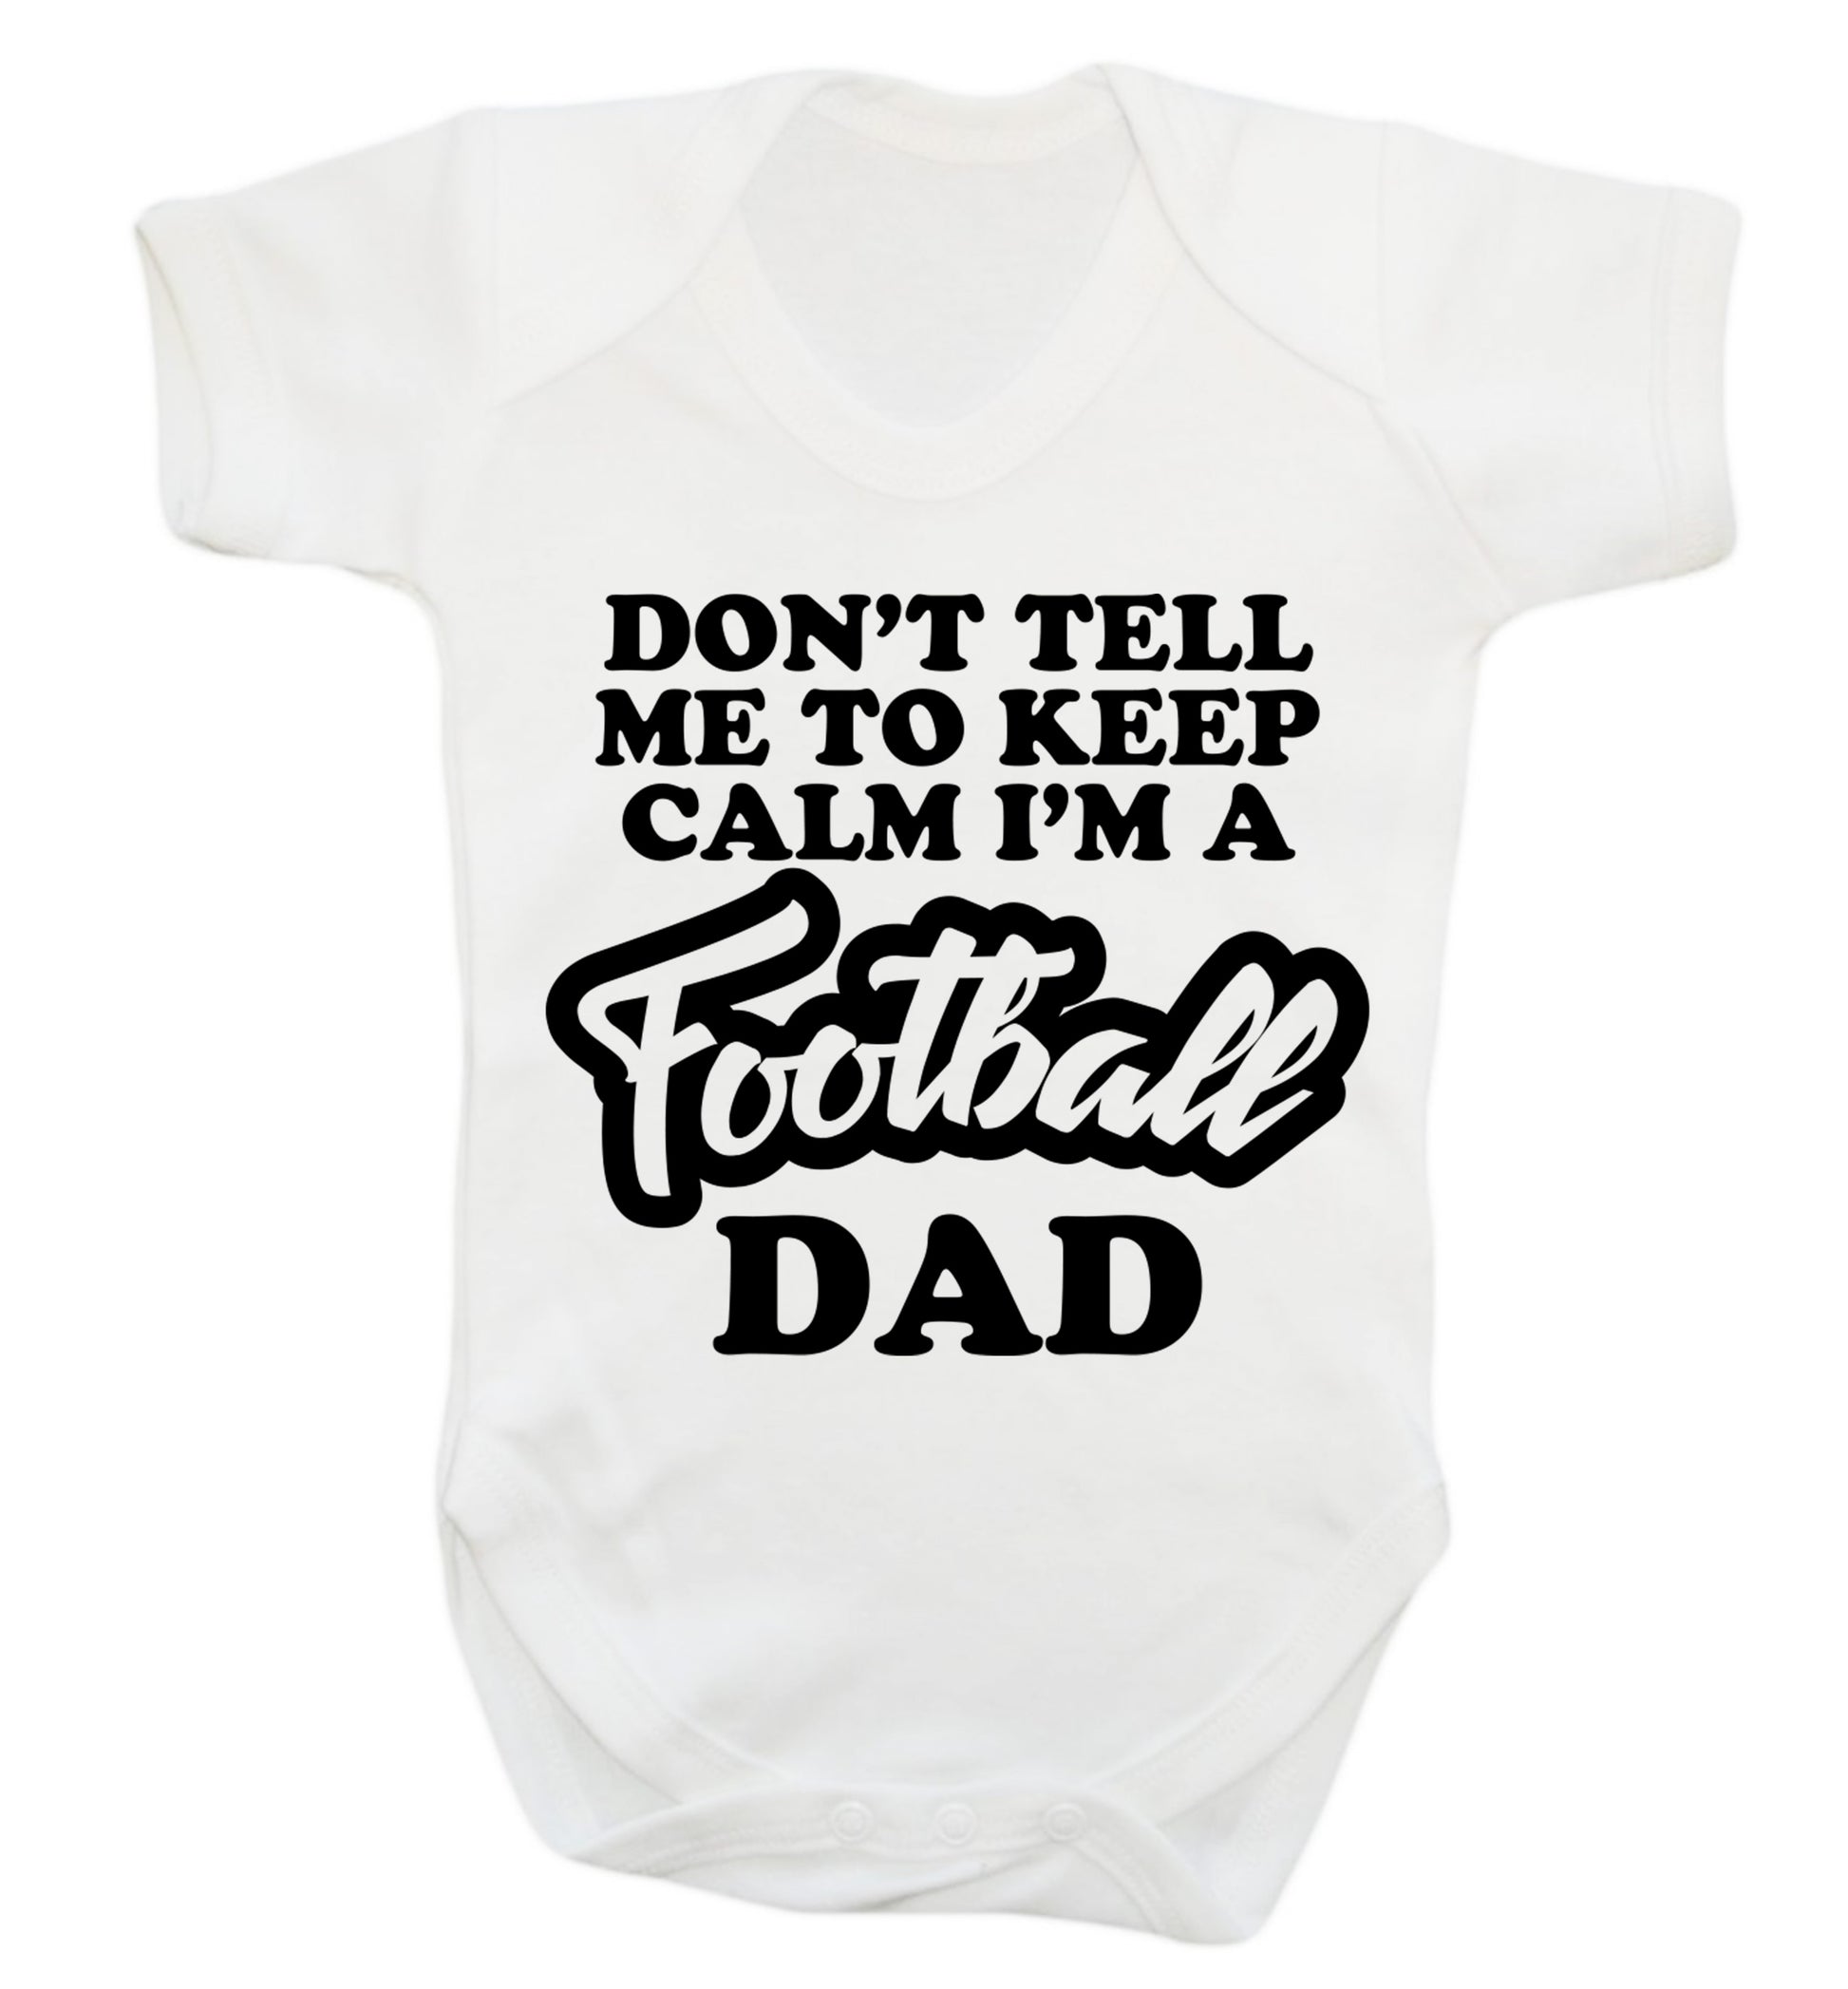 Don't tell me to keep calm I'm a football grandad Baby Vest white 18-24 months